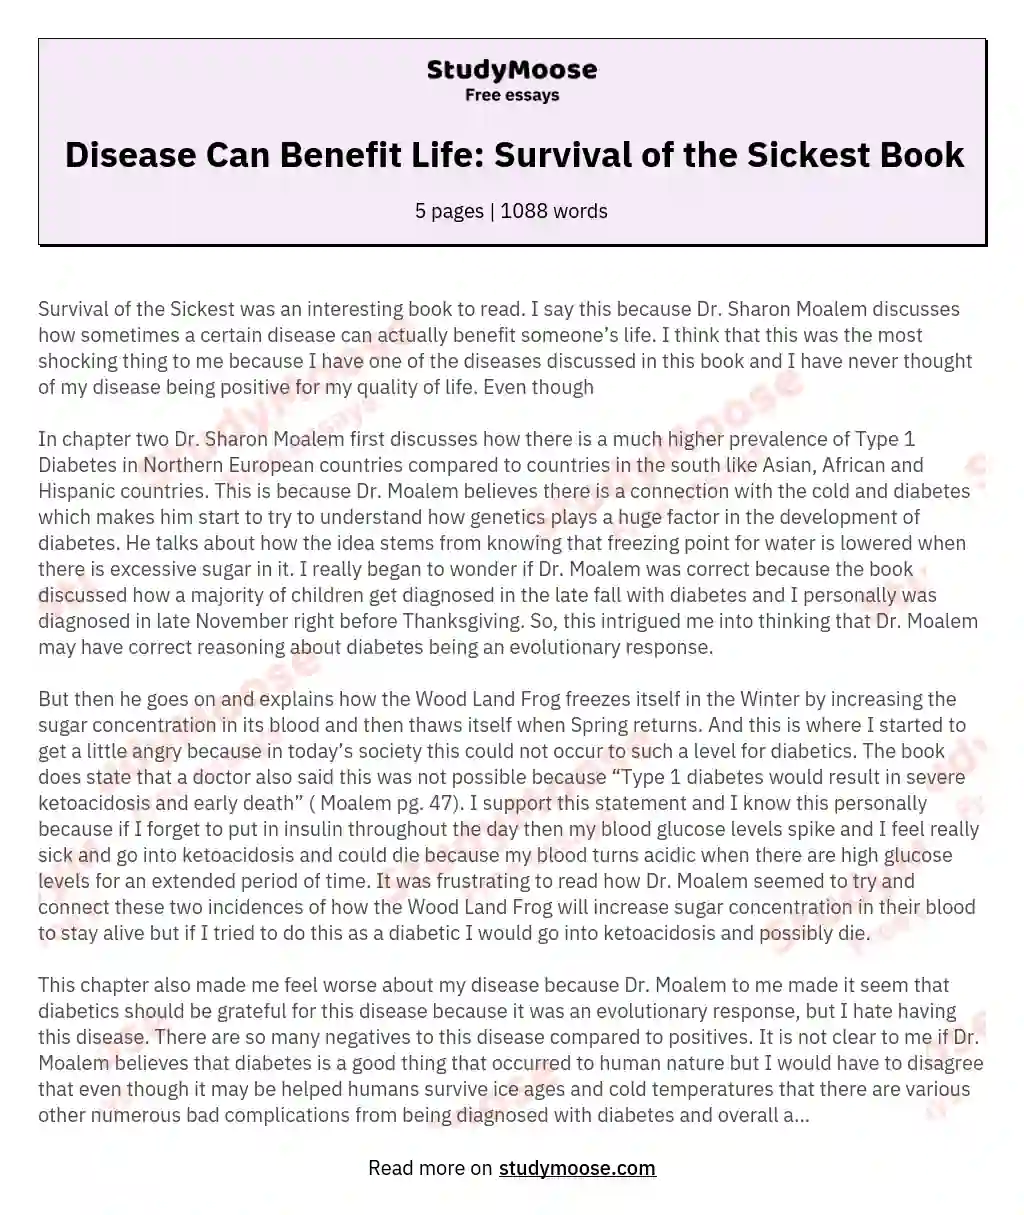 Disease Can Benefit Life: Survival of the Sickest Book essay